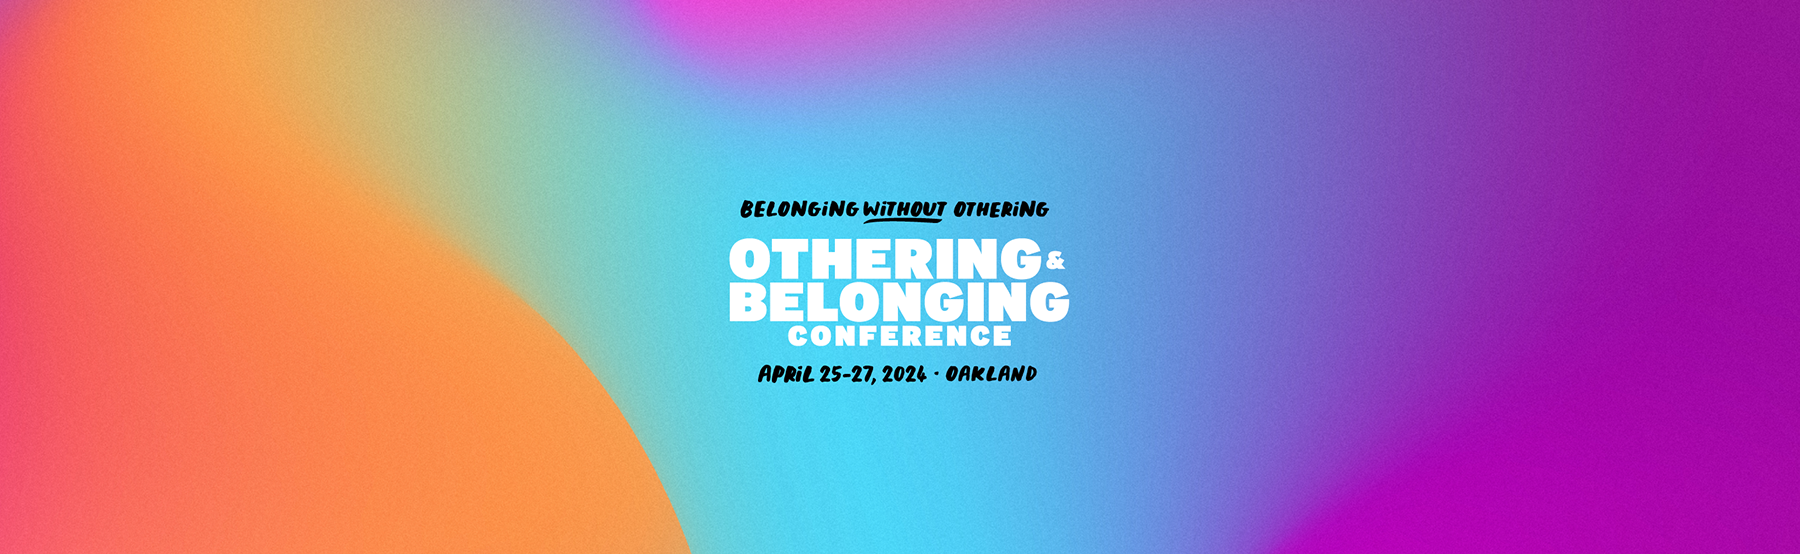 A gradient background with swirls of purples, oranges, and turquoise blues. In the center of the image are the words: Othering & Belonging Conference Oakland 2024, "Belonging Without Othering" (the word without is underlined); April 25-27, 2024, Oakland.